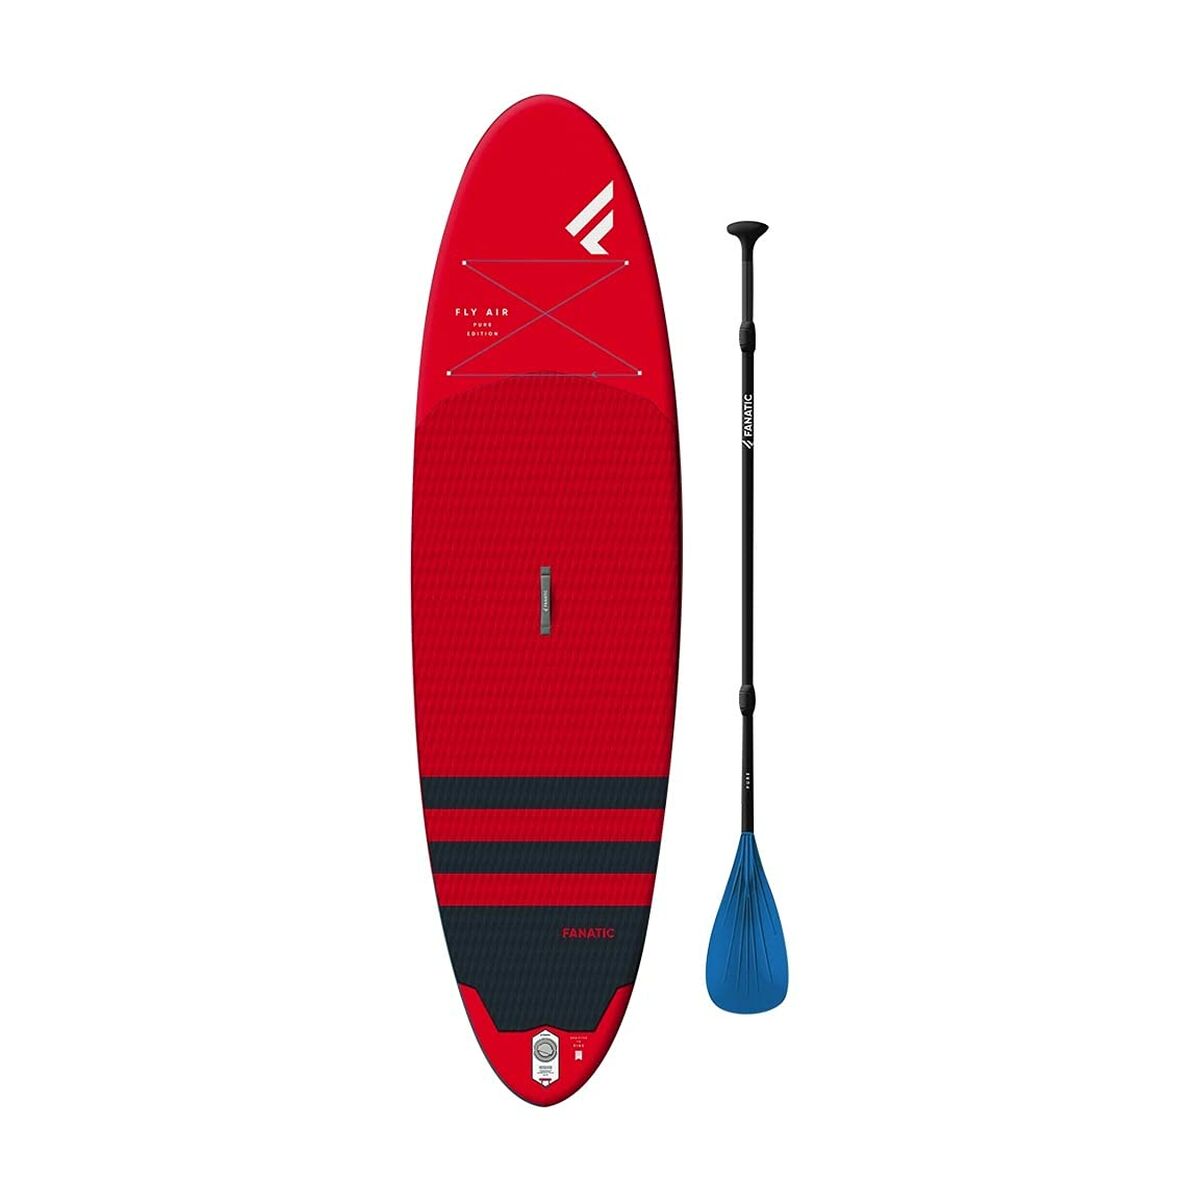 Inflatable Paddle Surf Board with Accessories Fanatic Air Air/Pure Fanatic 9´8 Red